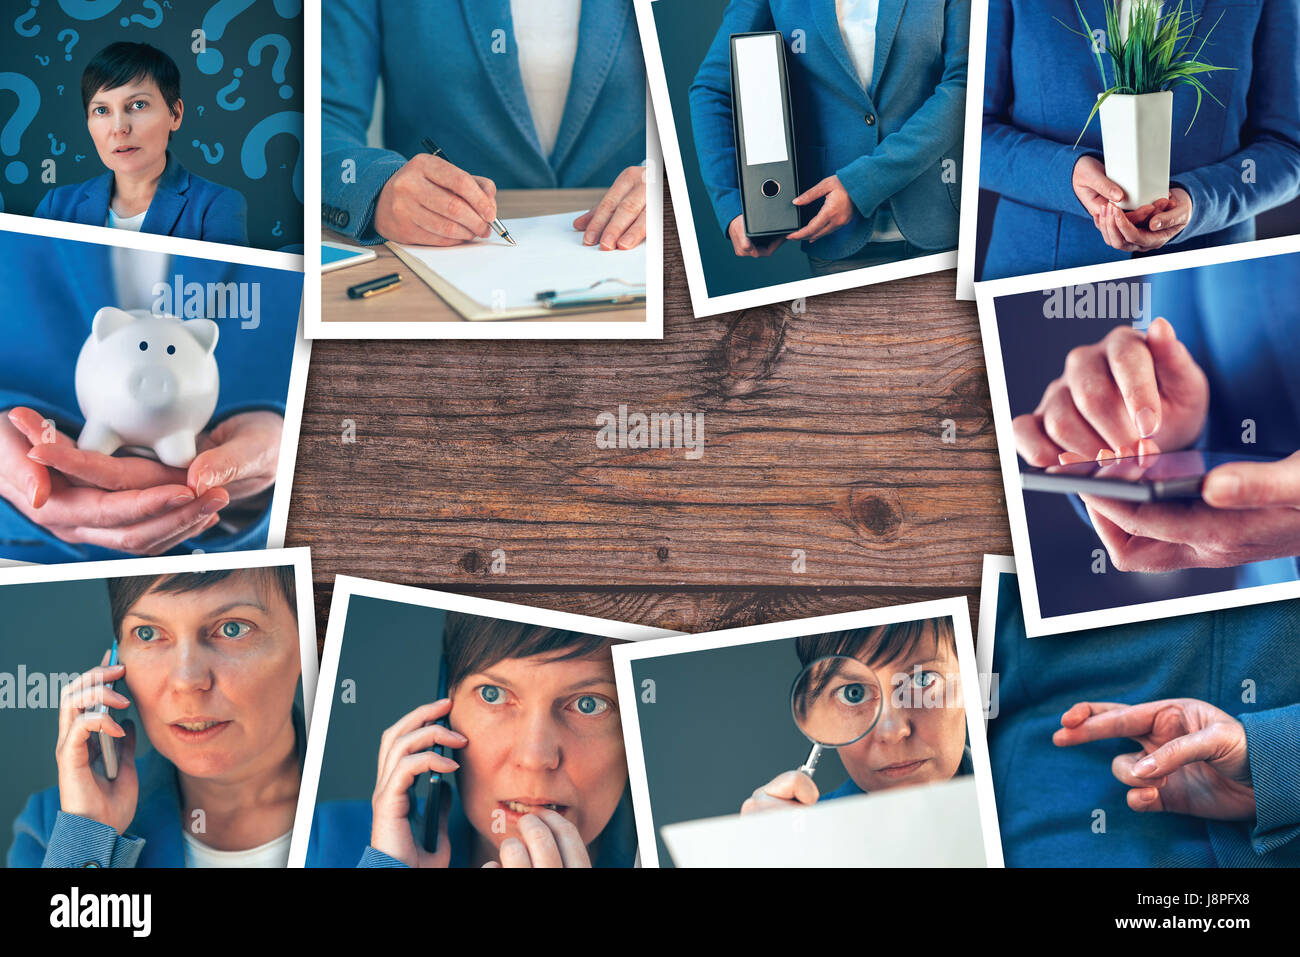 Woman in business and entrepreneurship photo collage over wooden office desk background Stock Photo